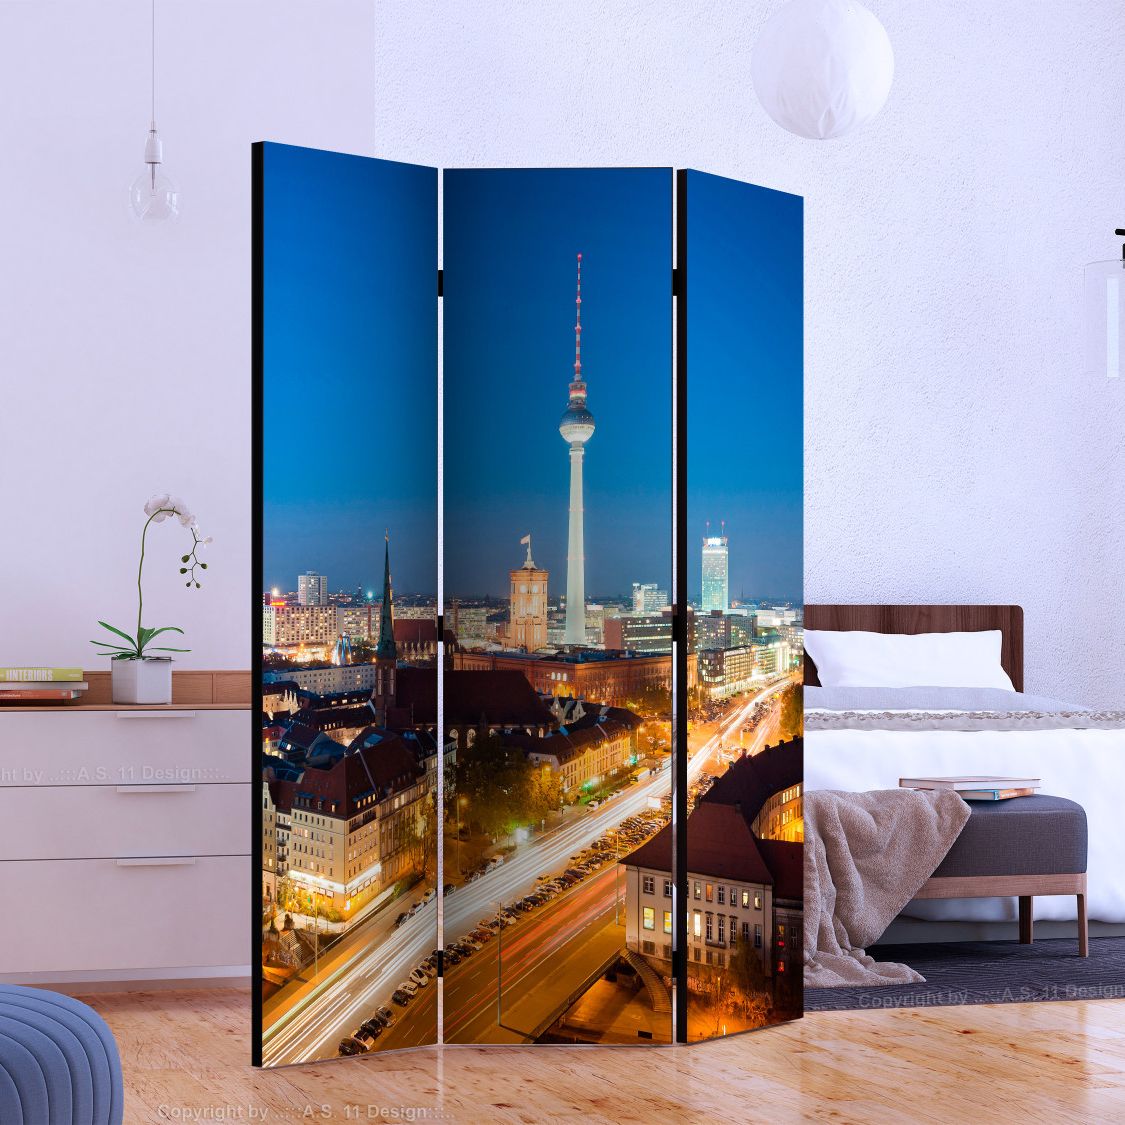 Folding screen with a picture of a city of seattle illuminated at night